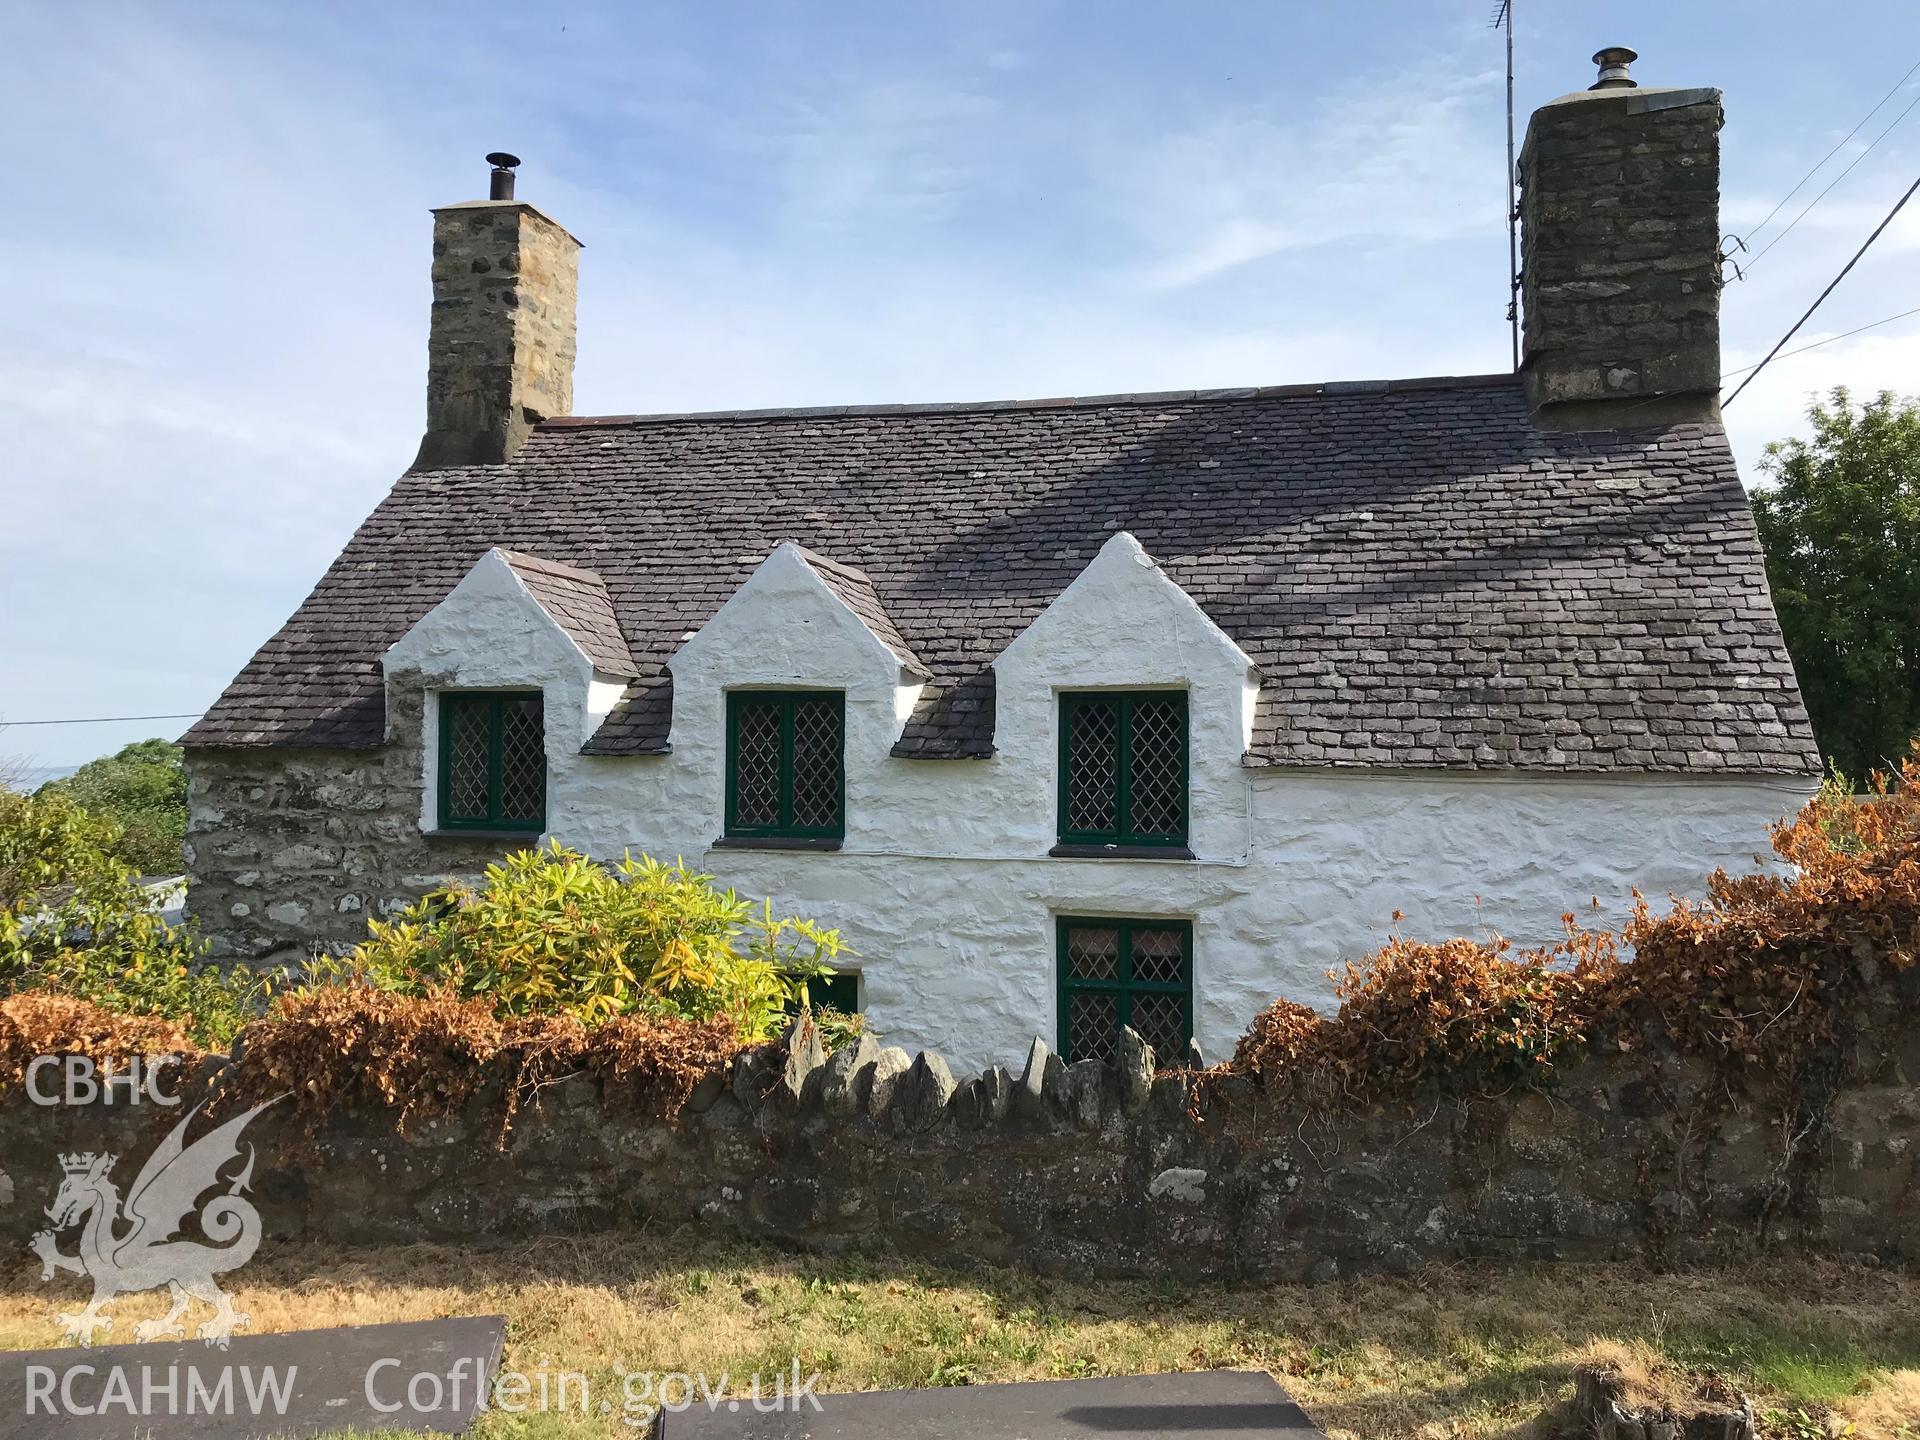 Colour photo showing external view of Cwrt house, Clynnog, taken by Paul R. Davis, 23rd June 2018.